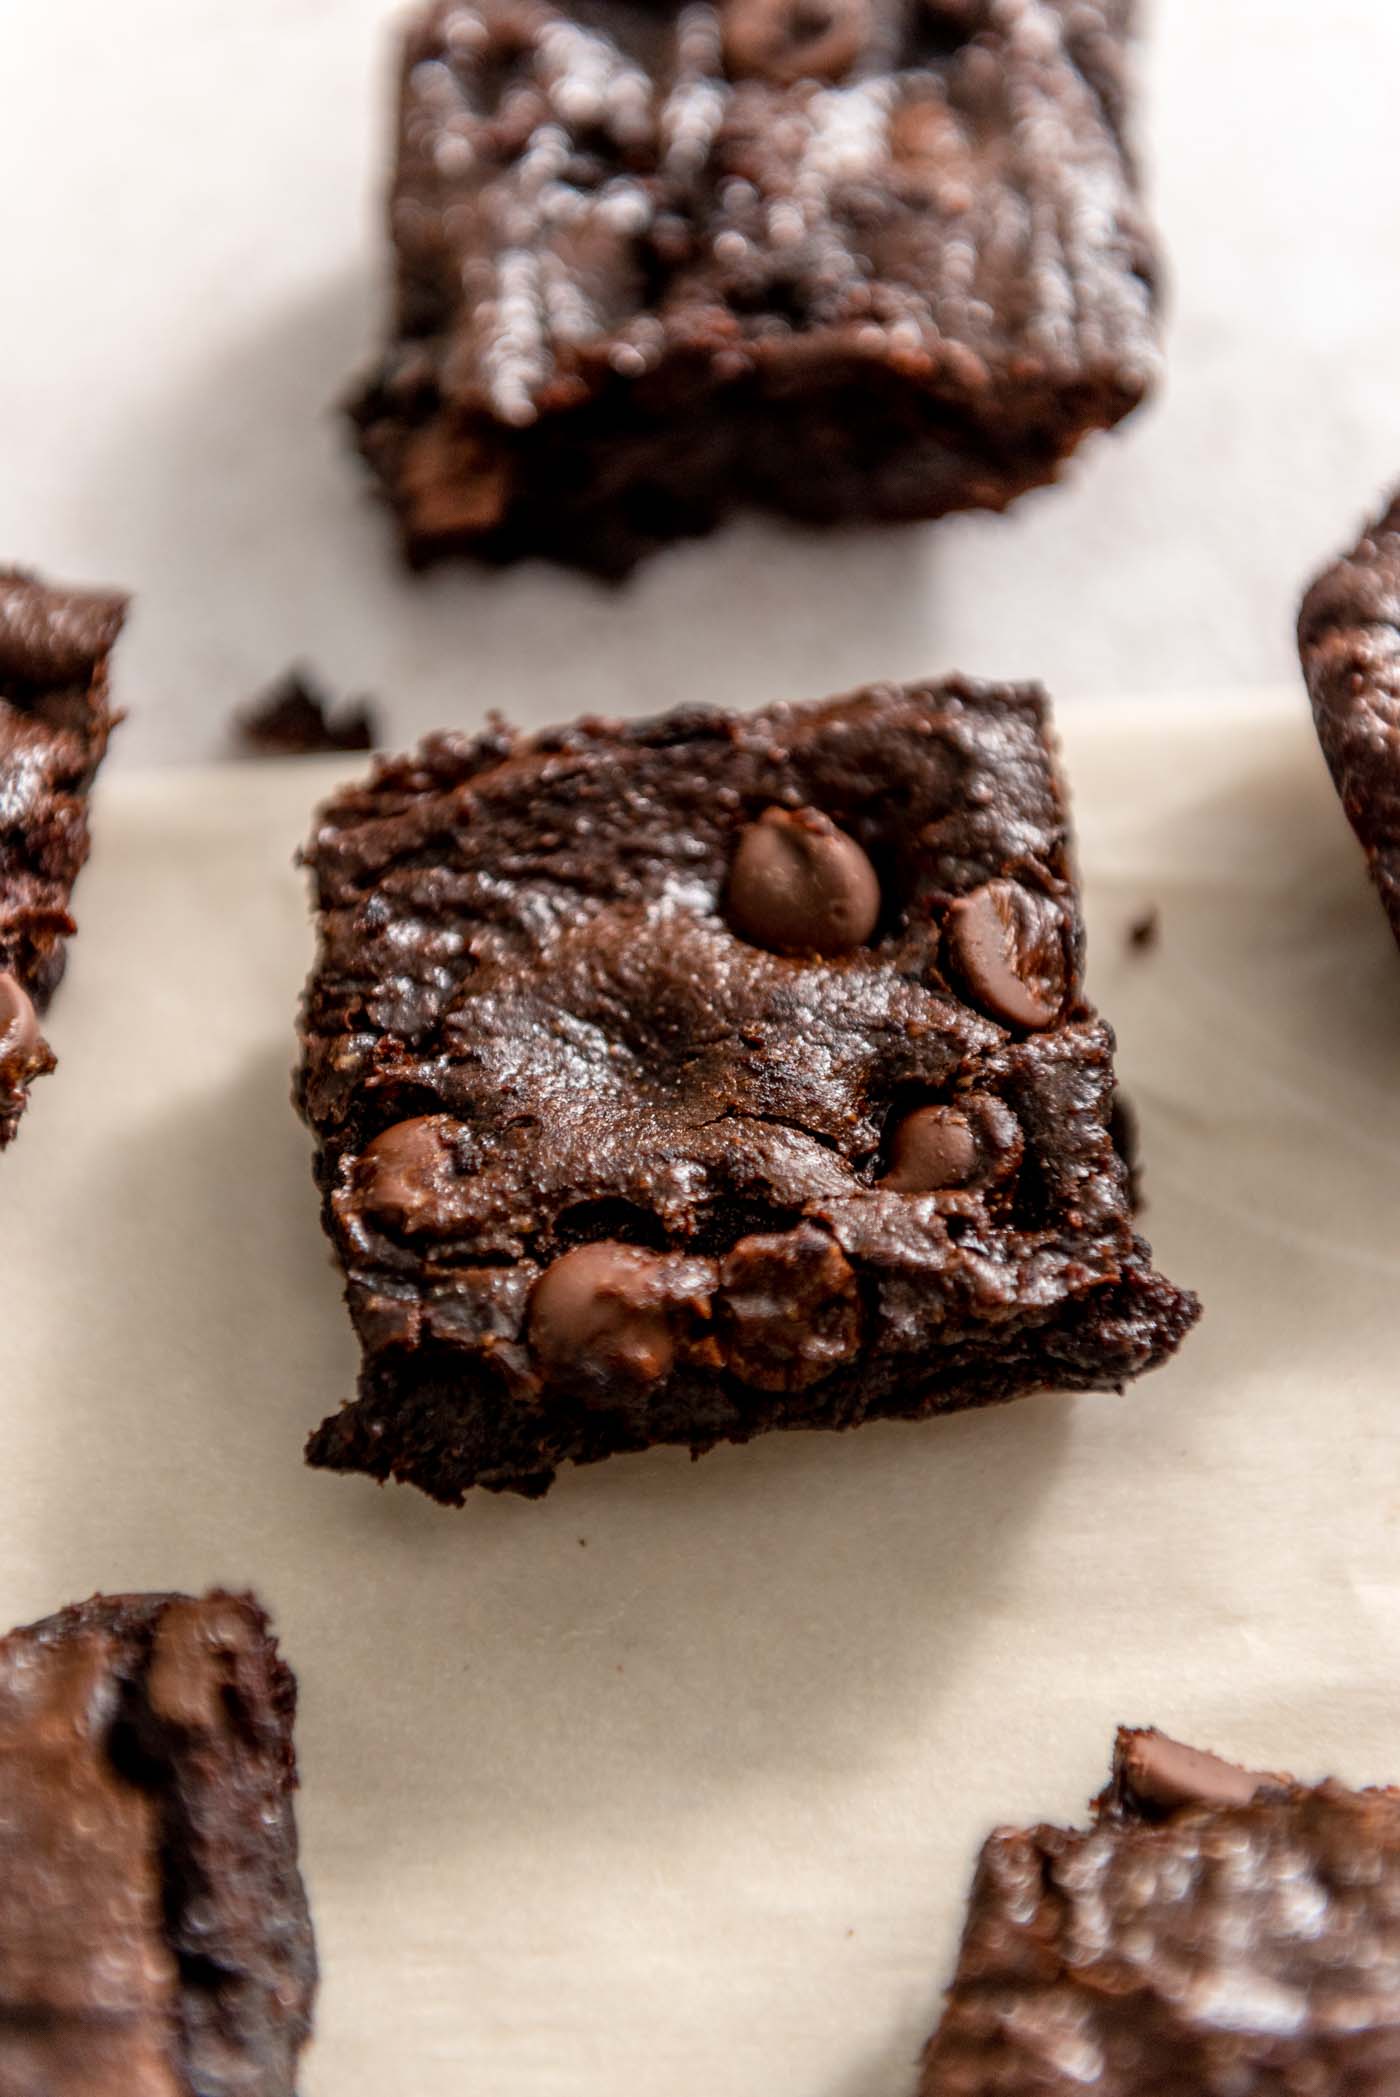 An avocado brownie with chocolate chips on a piece of parchment paper surrounded by more brownies.